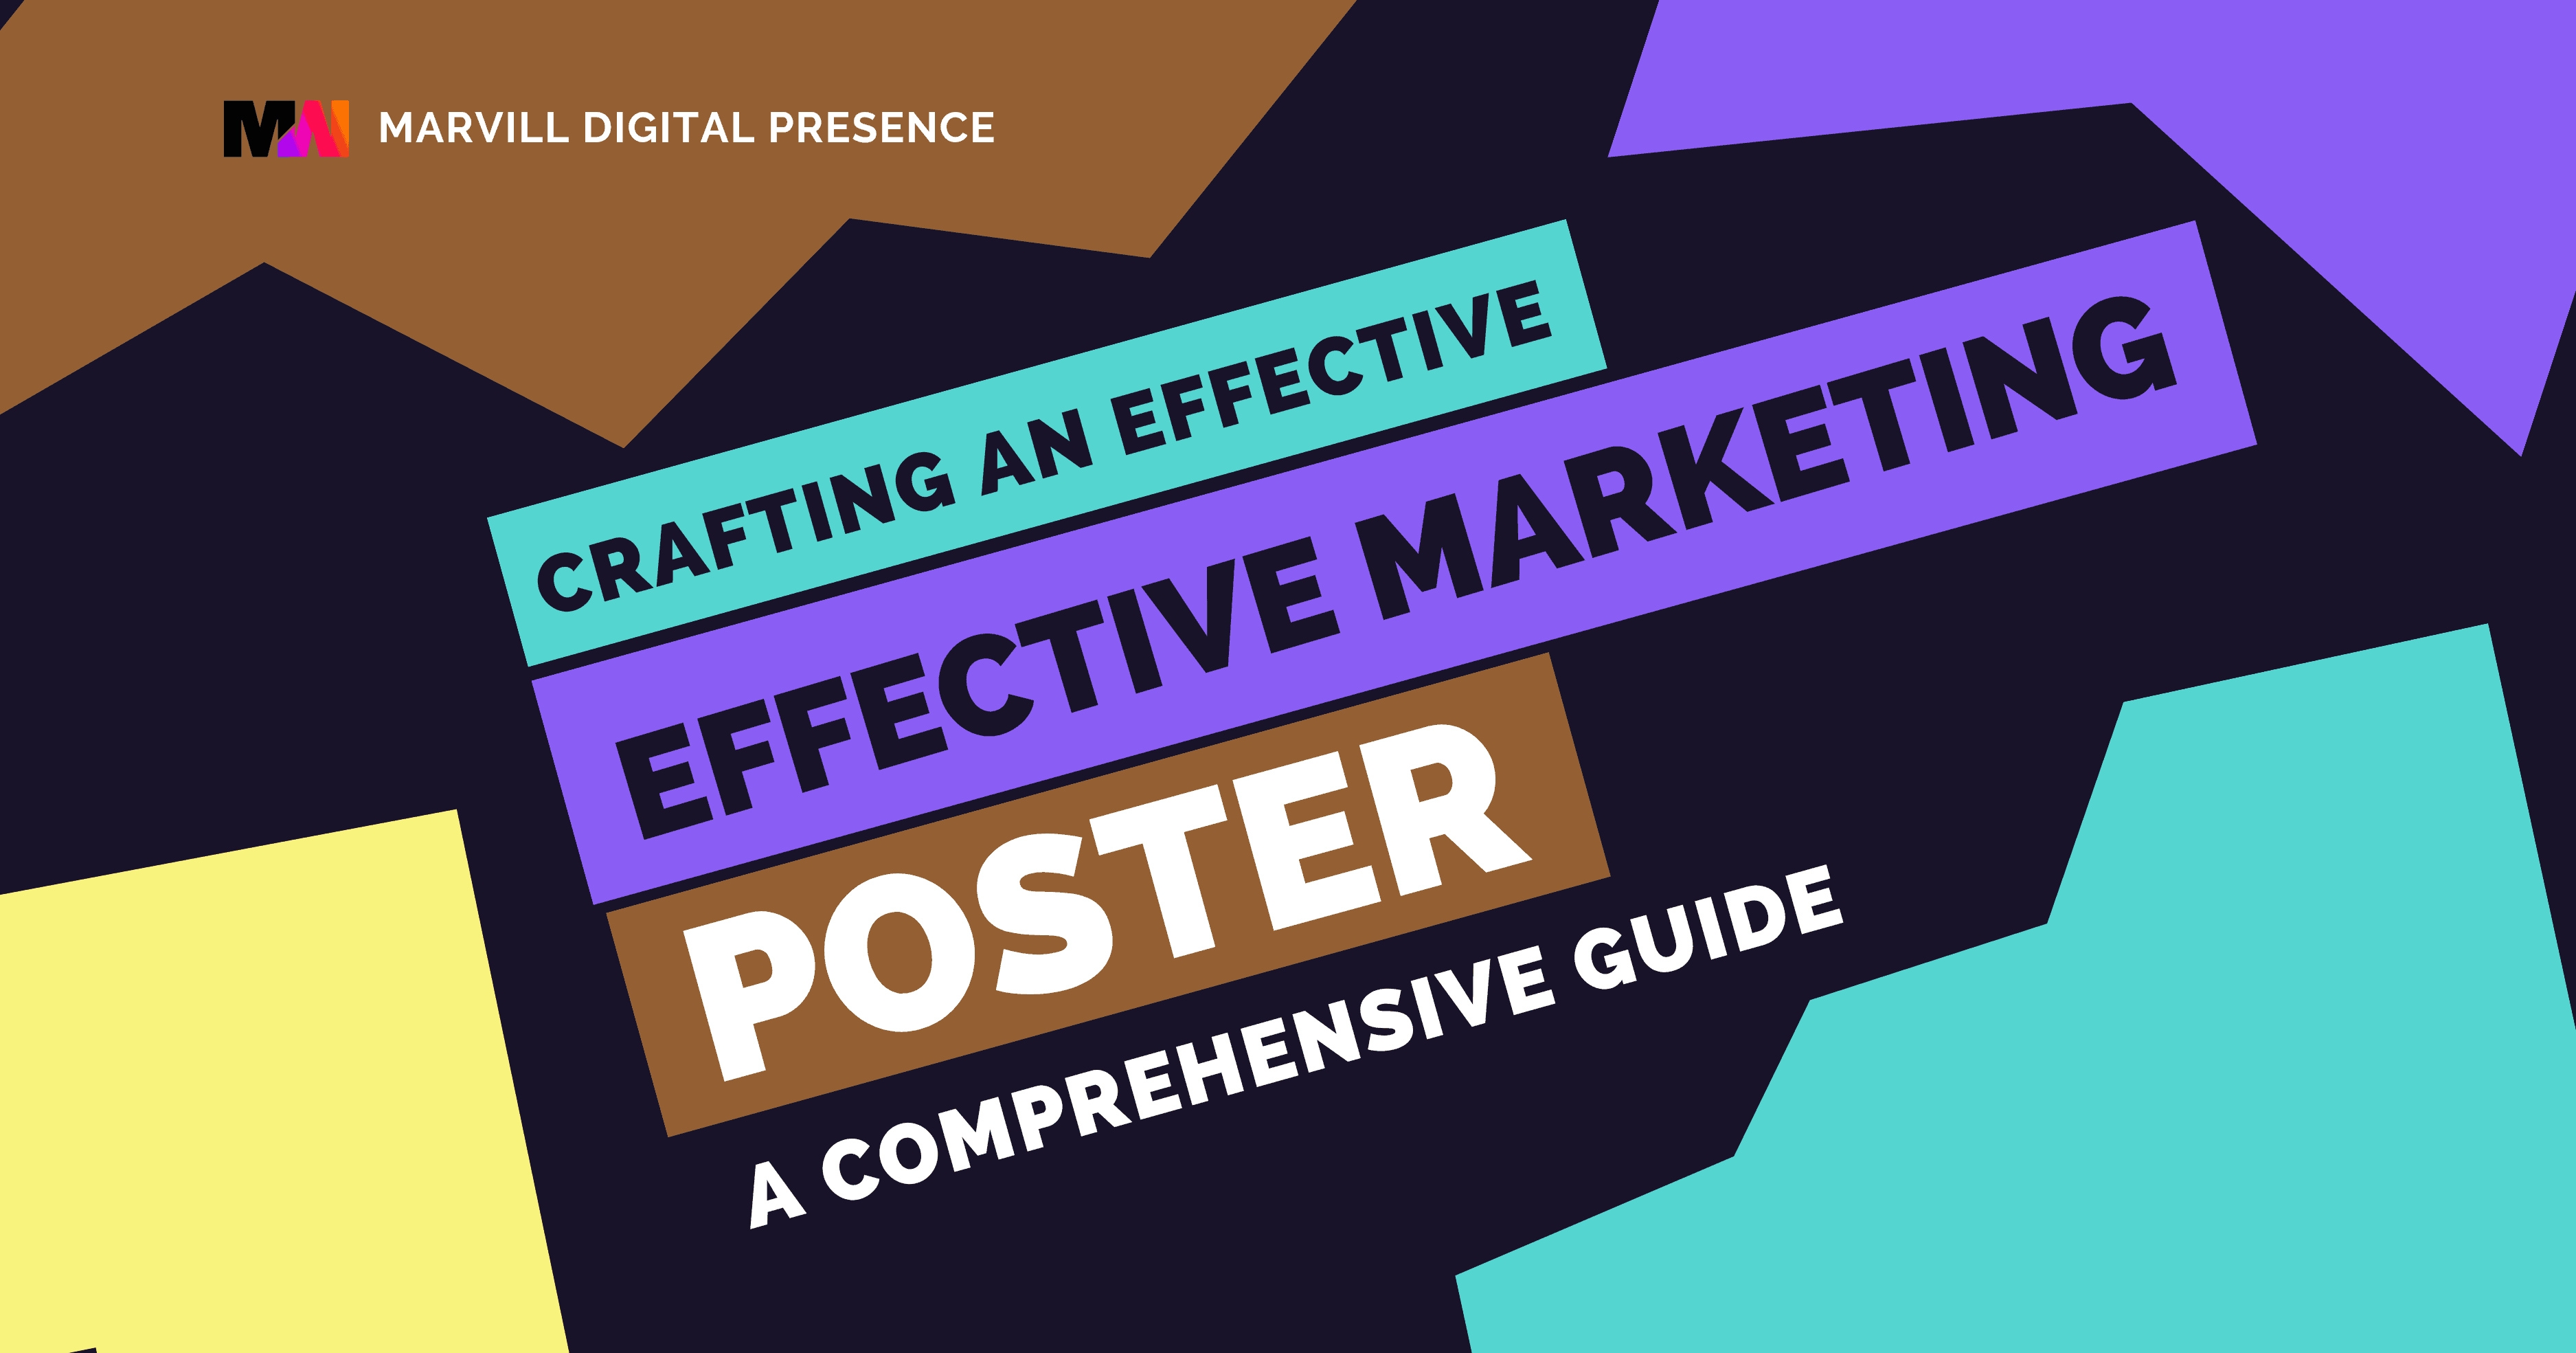 Crafting an Effective Marketing Poster: A Comprehensive Guide